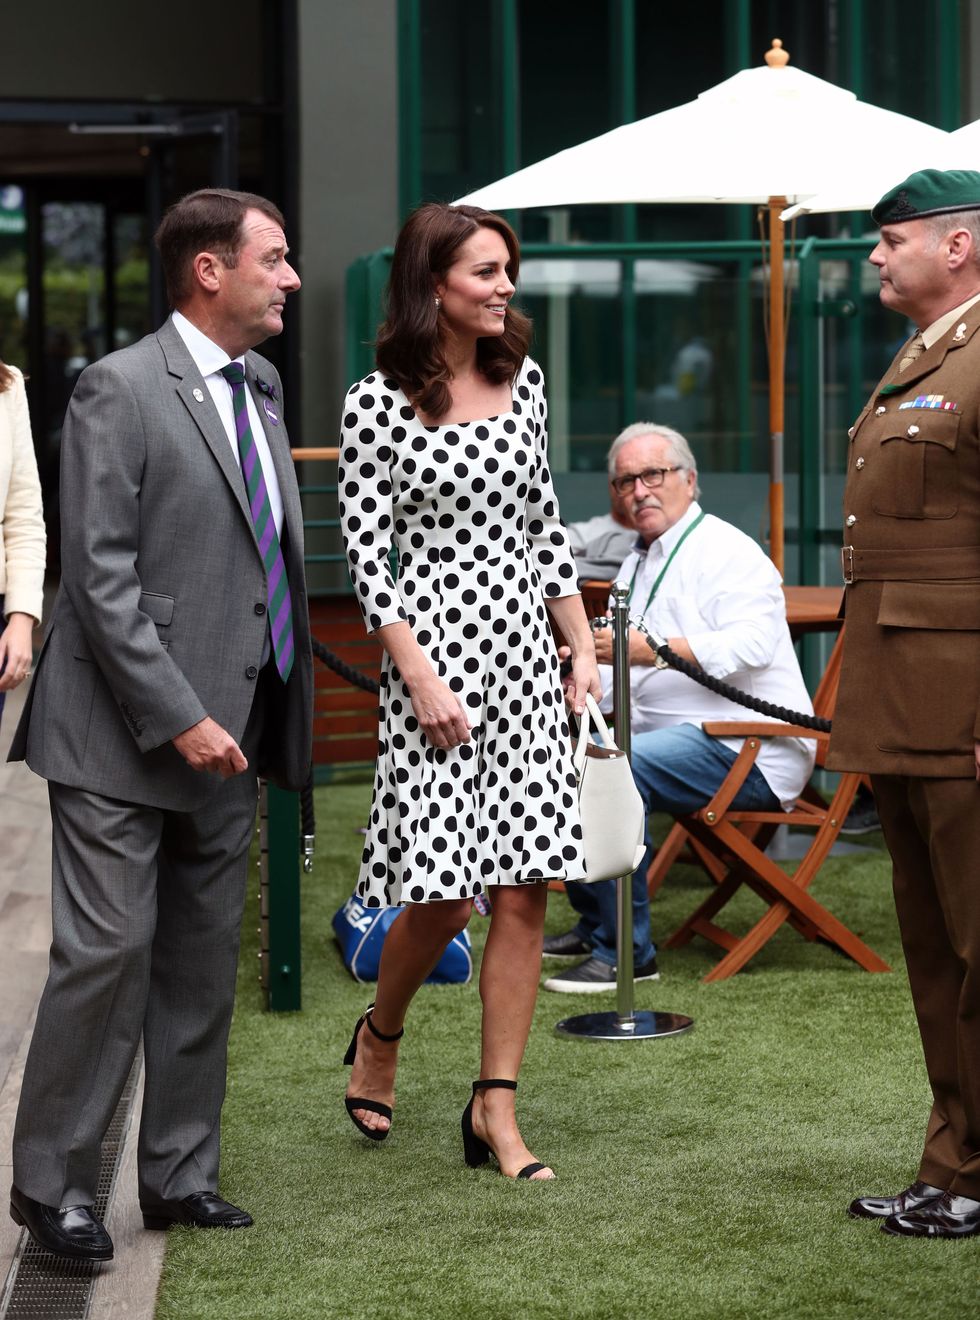 LONDON, UNITED KINGDOM - JULY 3:  Catherine, Duchess of Cambridge, Patron of the All England Lawn Tennis and Croquet Club (AELTC) with AELTC Chairman Philip Brook (L) as she meets servicemen and women on day one of the Wimbledon Championships at The All England Lawn Tennis and Croquet Club, in Wimbledon on July 3, 2017 in London, England.  (Photo by Gareth Fuller - WPA Pool/Getty Images)